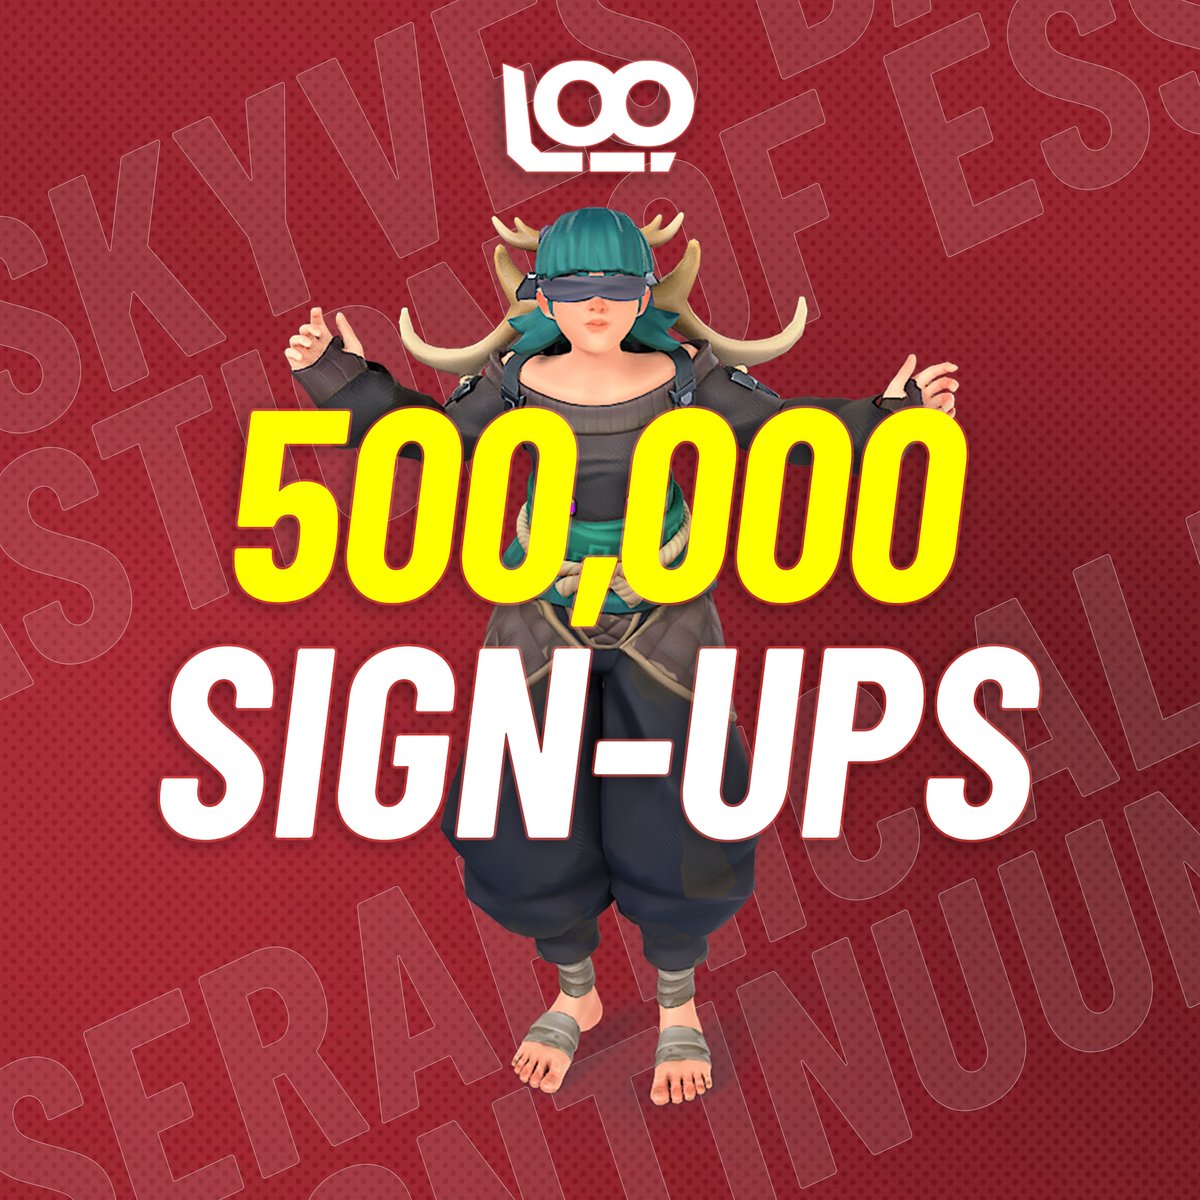 HALF A MILLION SIGN-UPS! 💥 Looks like we'll need to scale up our server infrastructure even more for the upcoming play-to-airdrop! 😆 Registrations will close at the end of April. ➡️ bloodloop.com/onboard